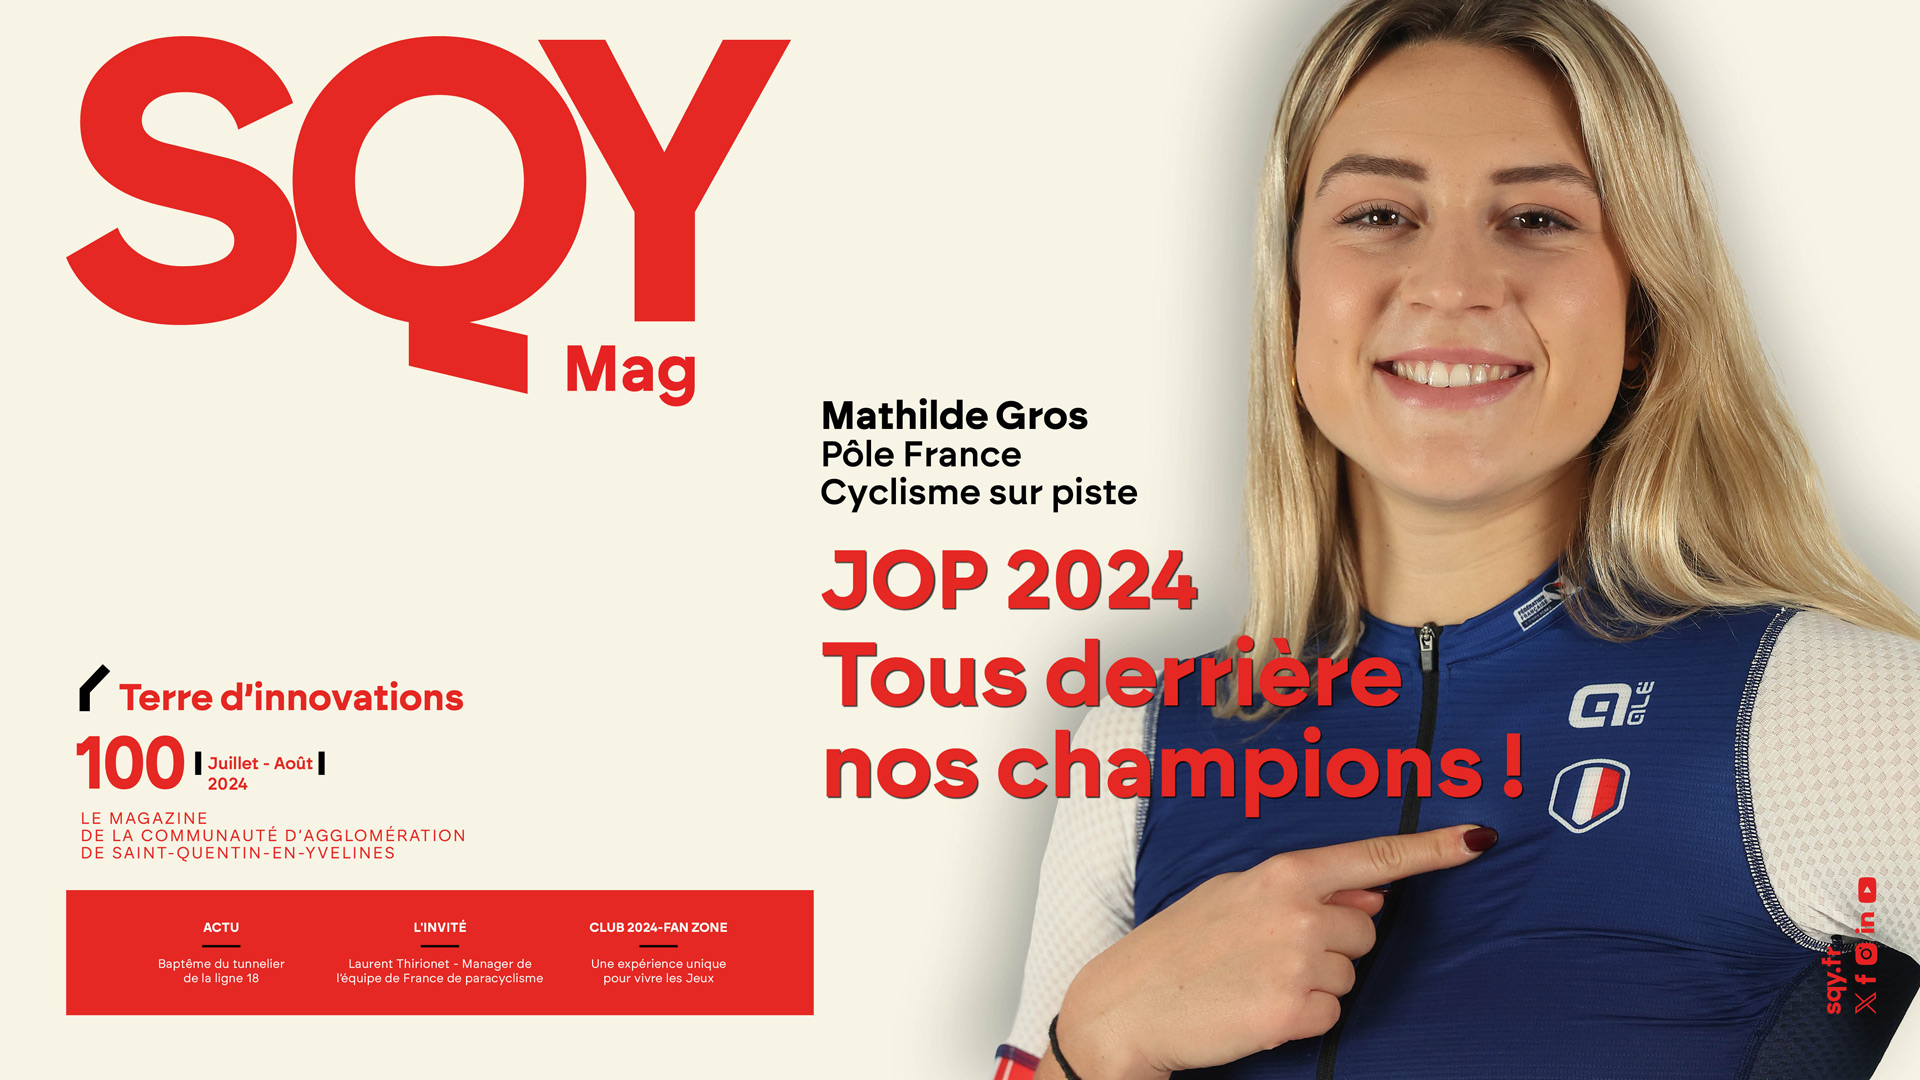 SQY Mag 100 juillet 2024 Champions SQY